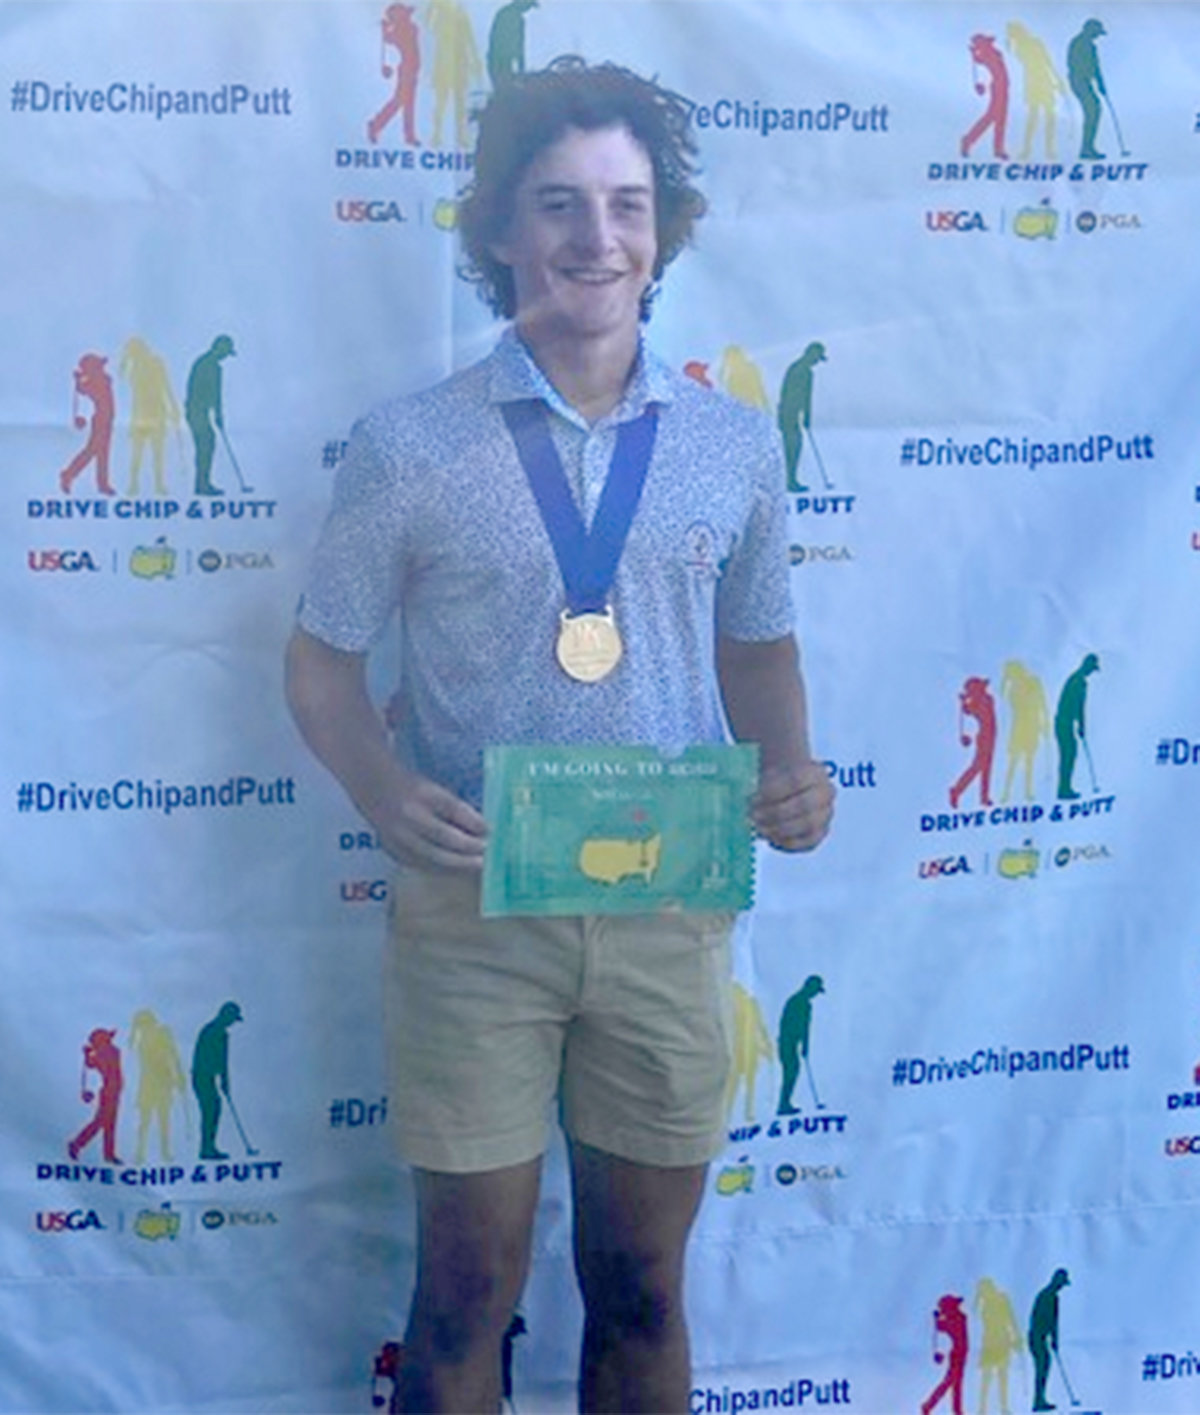 Jacob Olearczyk of Barneveld won his age group at the regional qualifier for the National Drive, Chip, and Putt Competition at TPC Boston on Saturday, Sept. 17. He will now compete for the national title at the 2023 Masters Tournament in Augusta, Georgia, in a nationally-televised event on April 2, 2023 prior to the start of the PGA event.